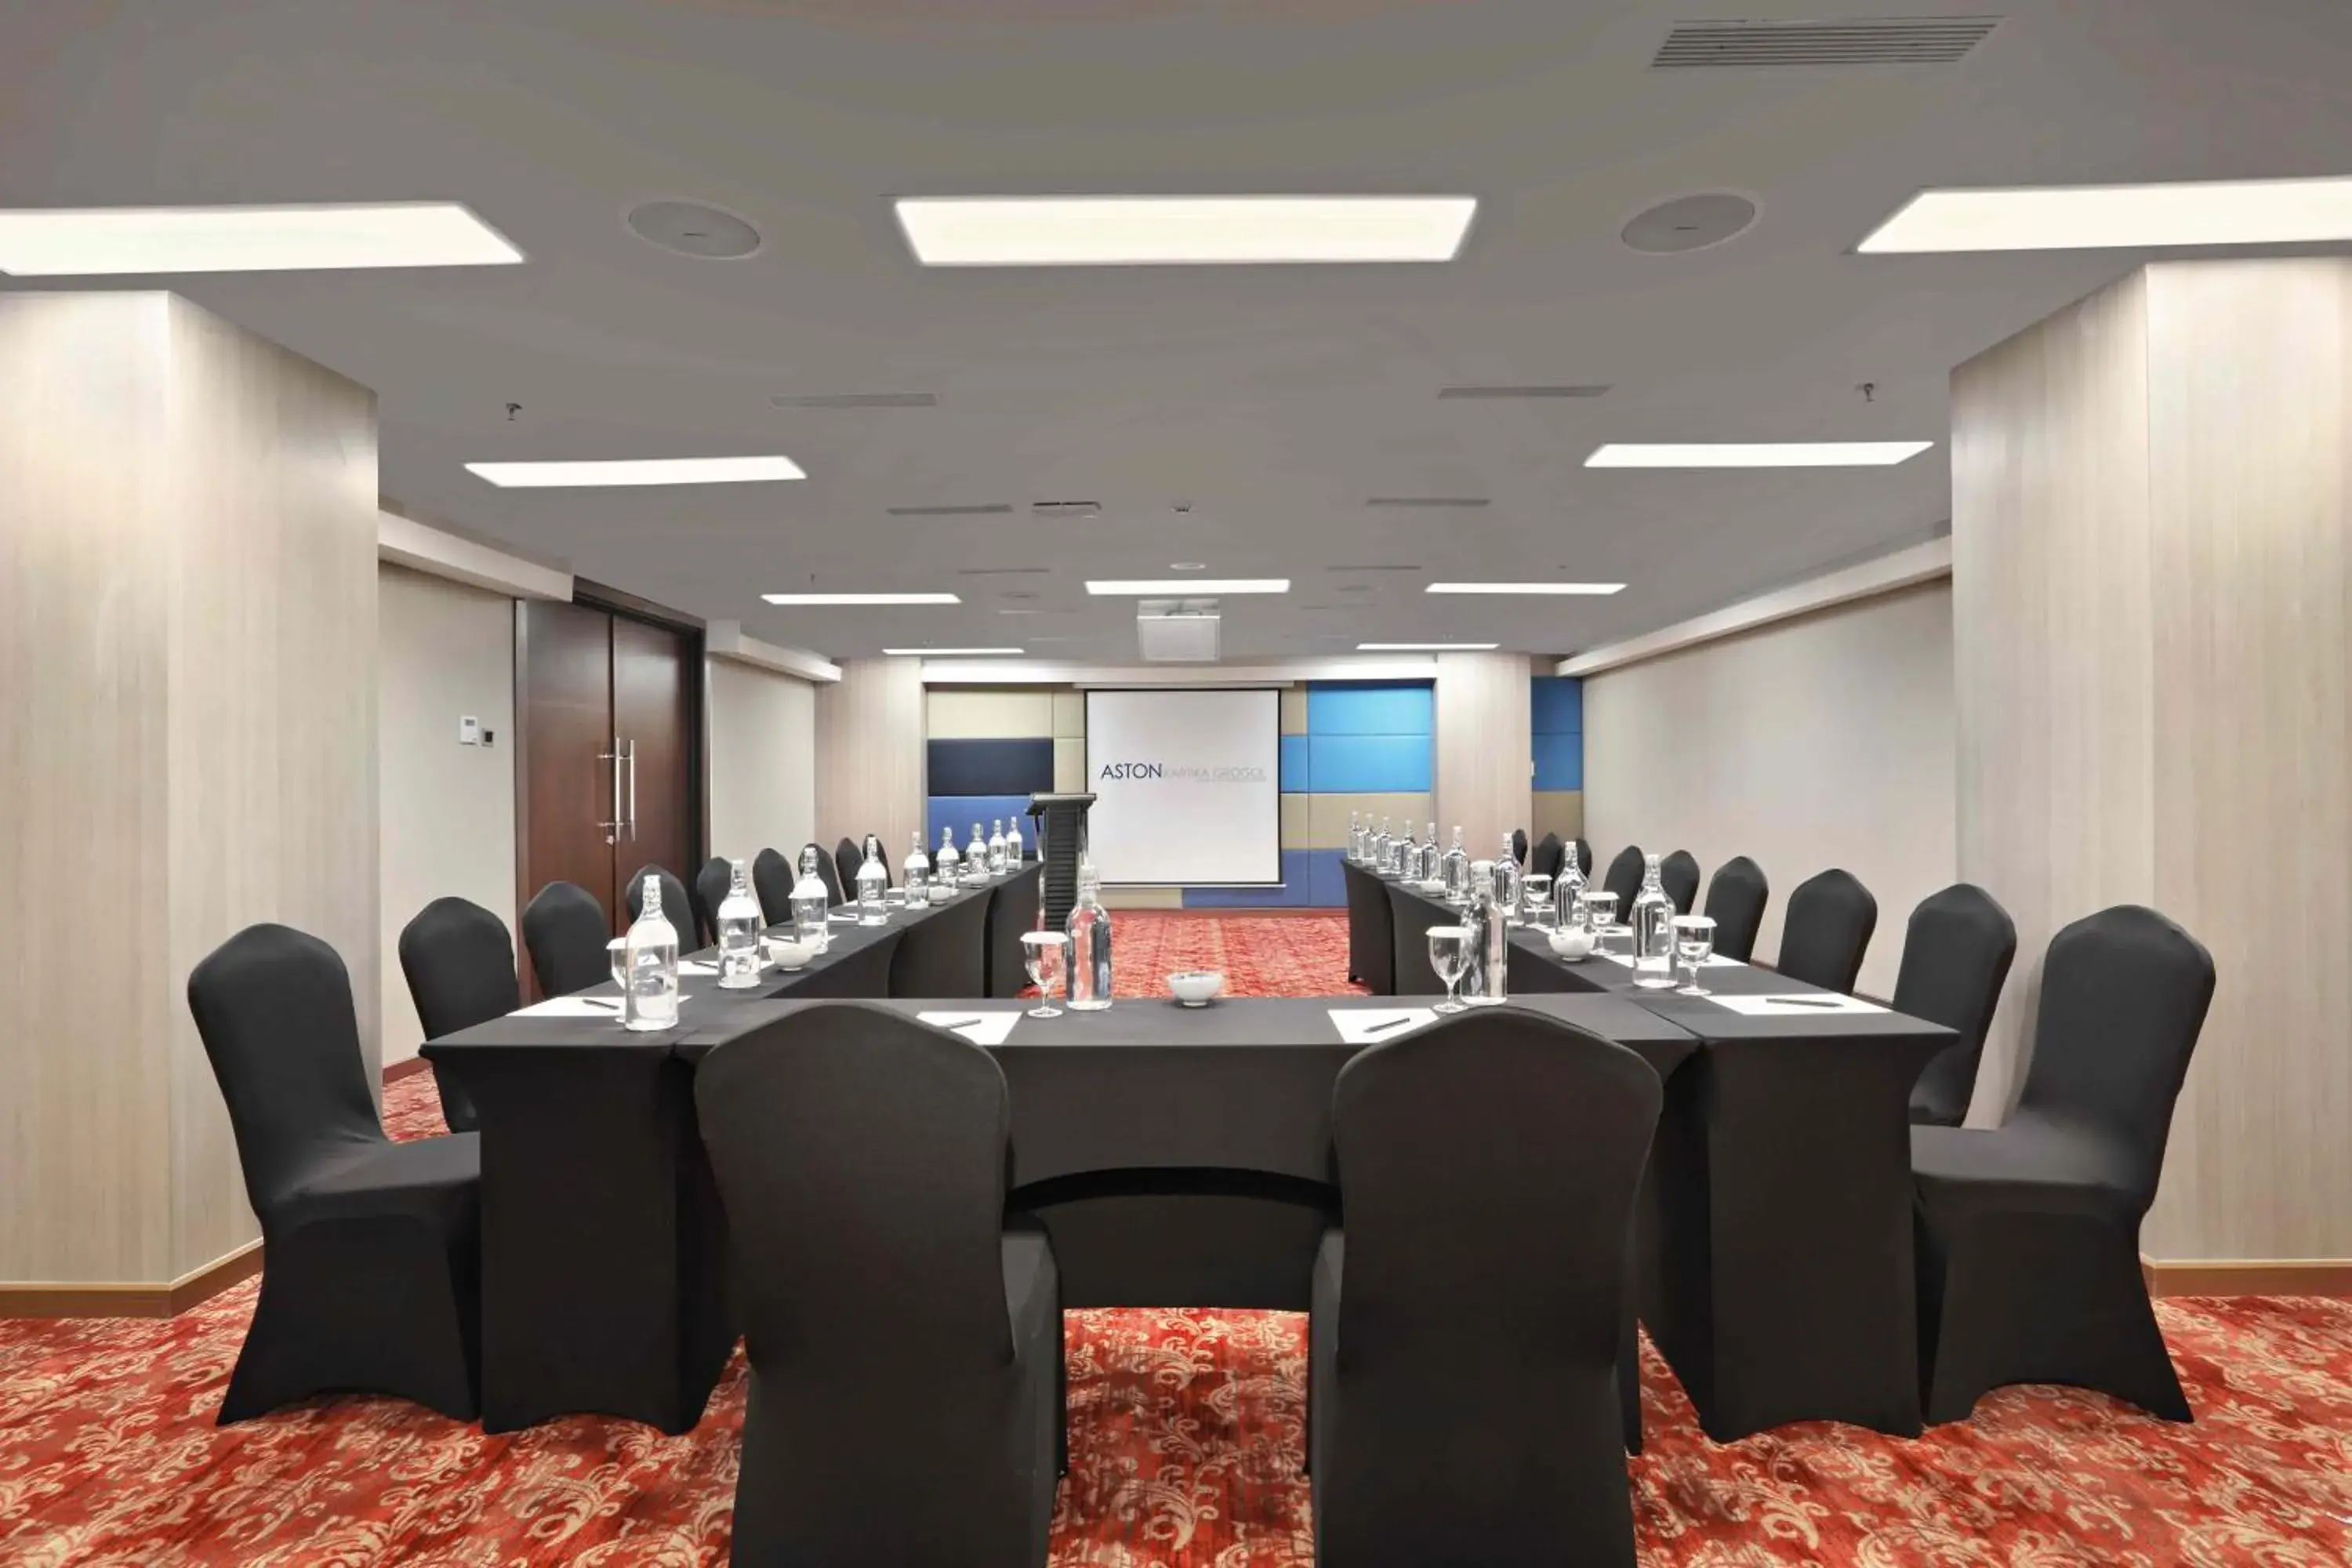 Meeting/conference room in ASTON Kartika Grogol Hotel & Conference Center